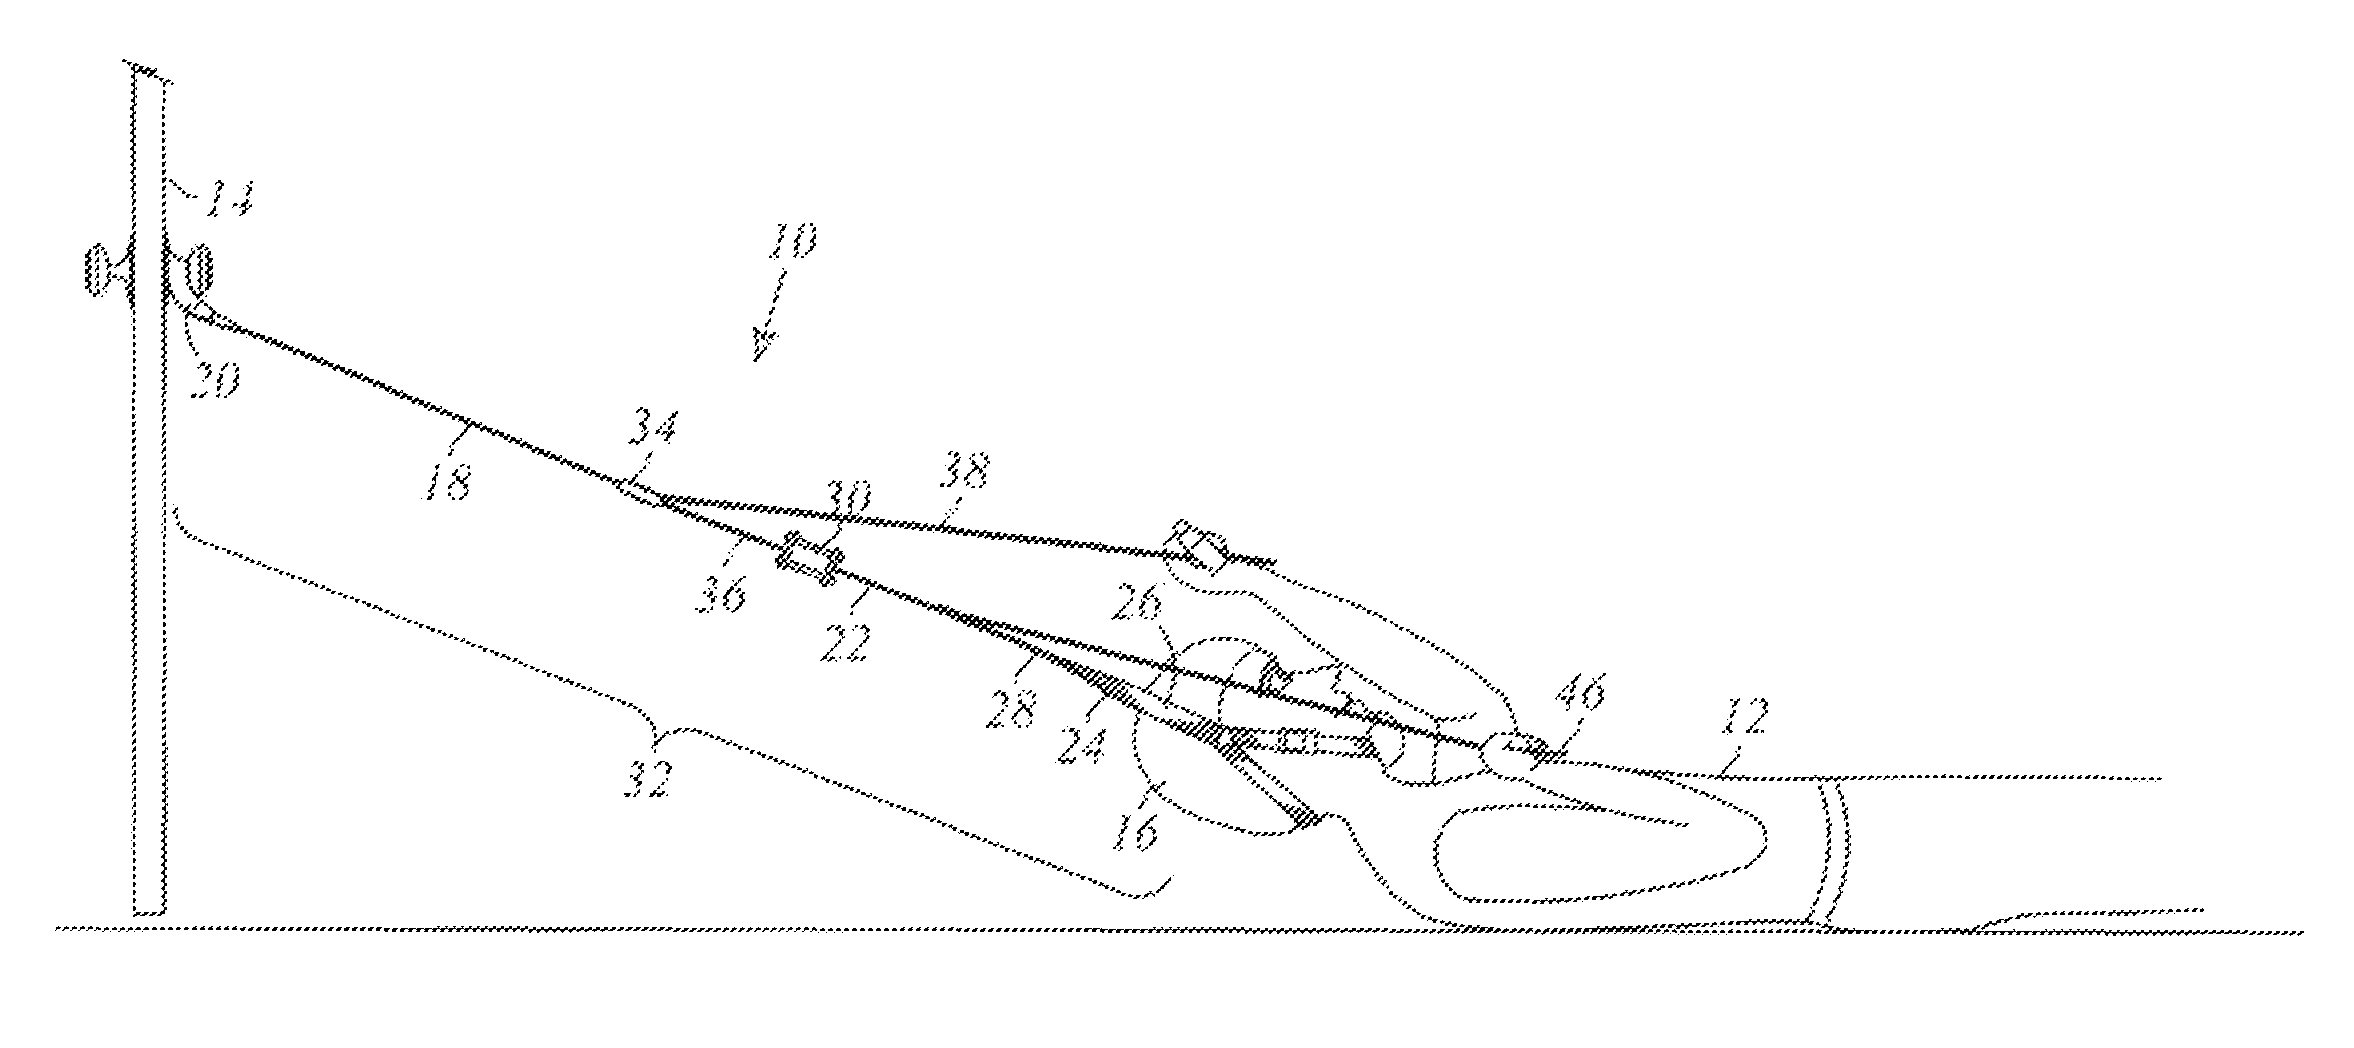 Spinal decompression device and method of use